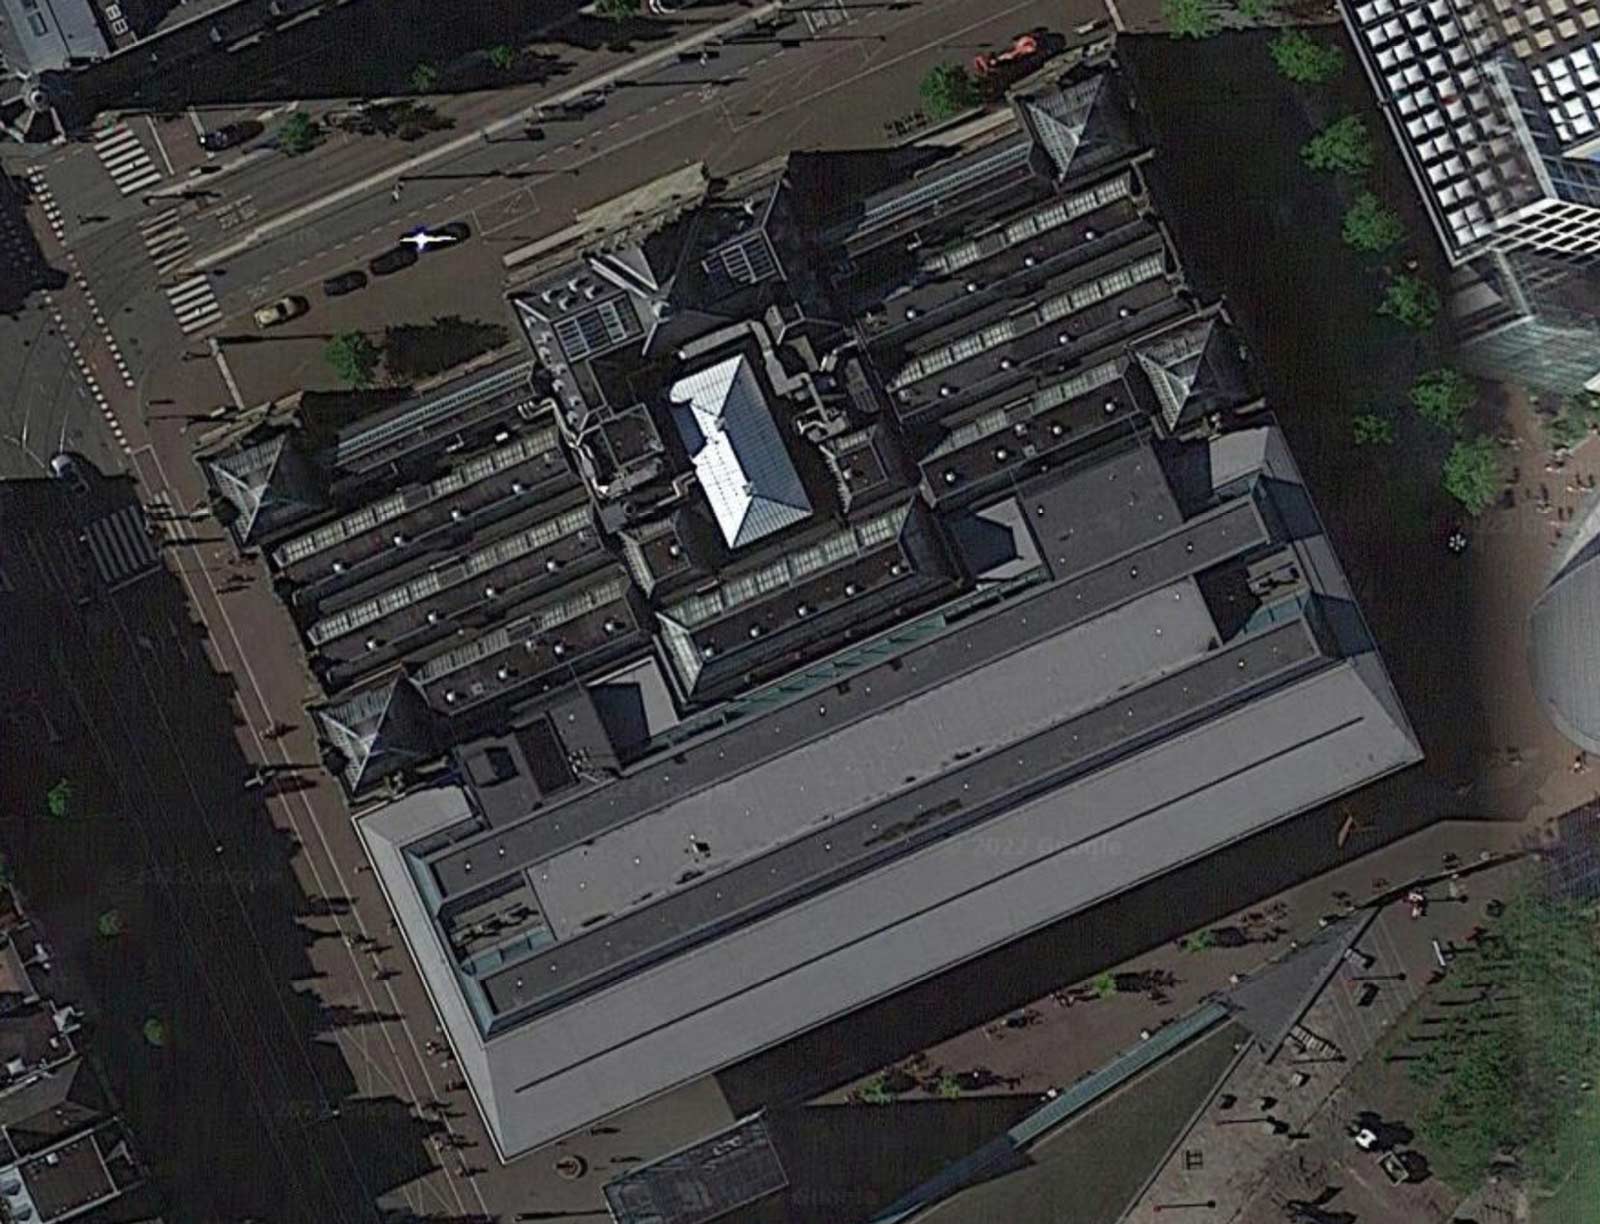 Overhead view of the Stedelijk’s roof. Google Maps, May 12, 2022.